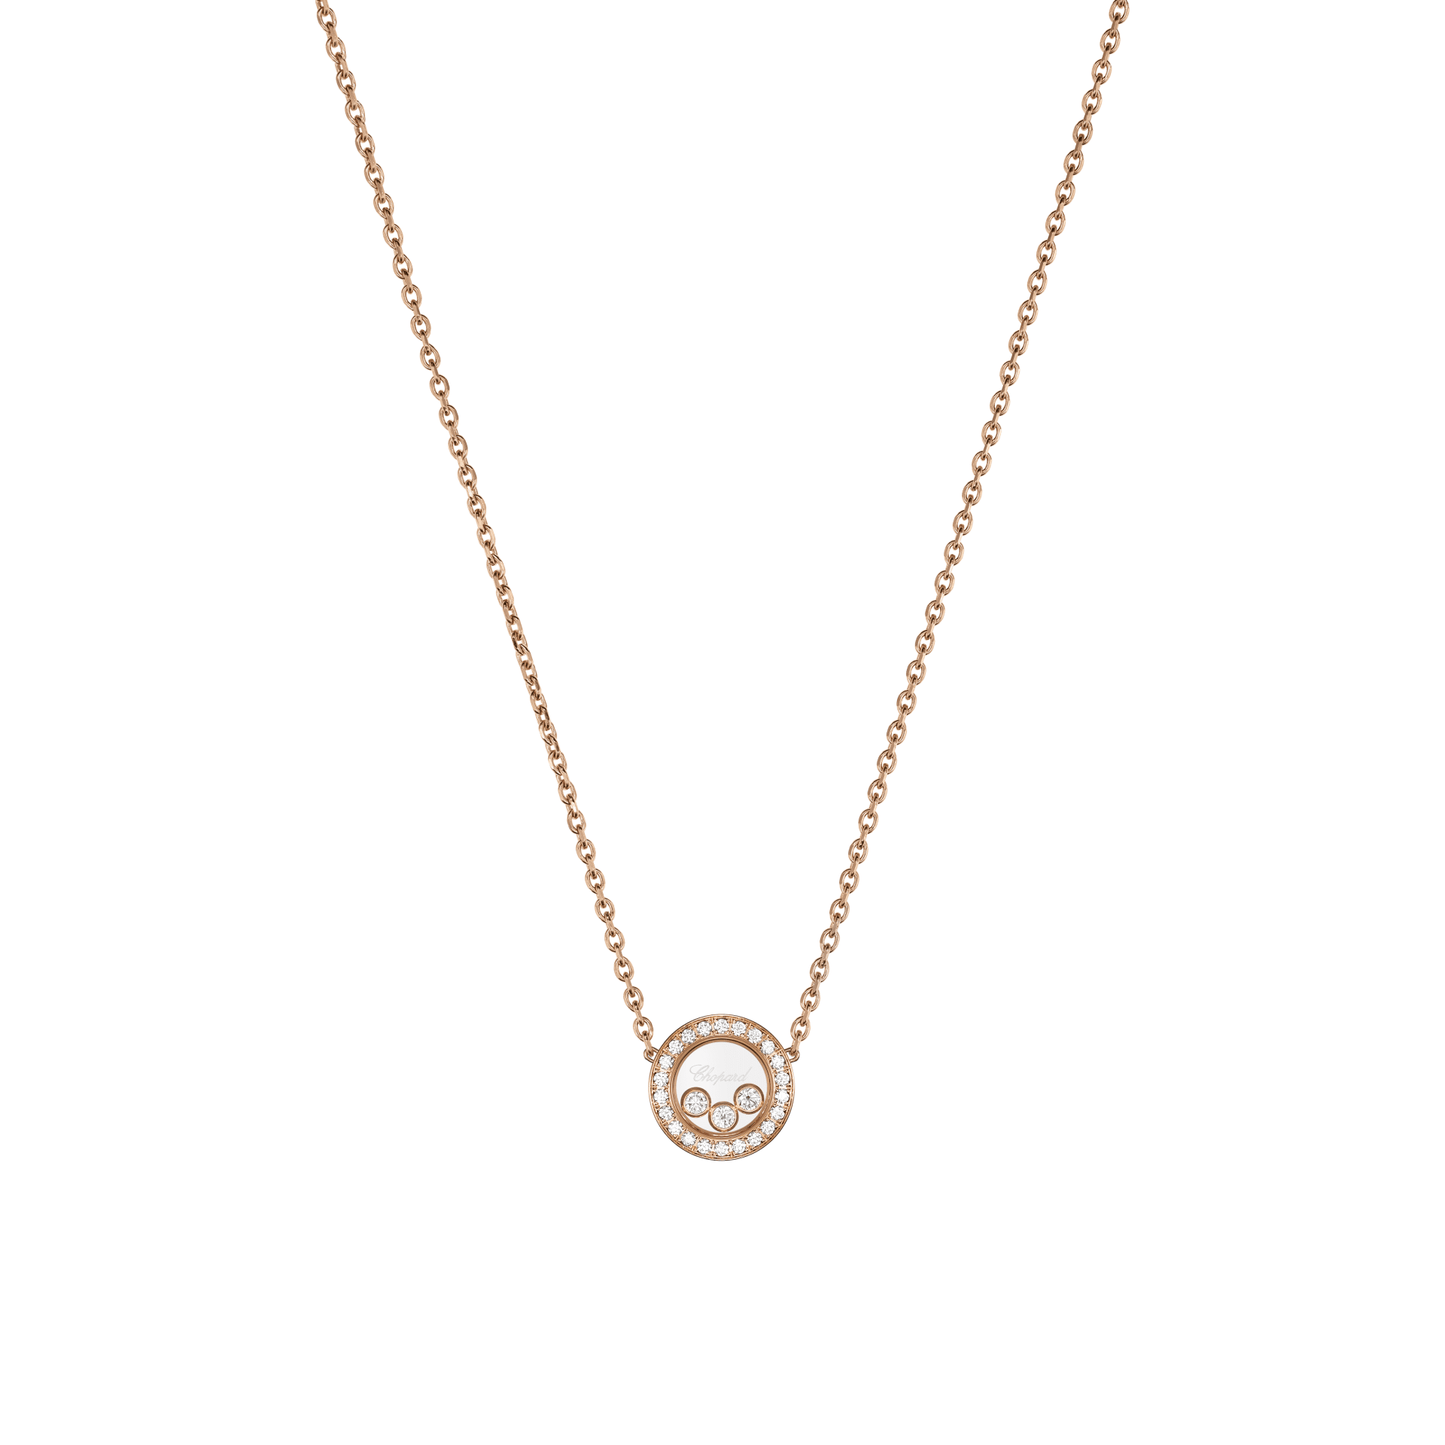 HAPPY DIAMONDS ICONS NECKLACE, ETHICAL ROSE GOLD, DIAMONDS 81A018-5201